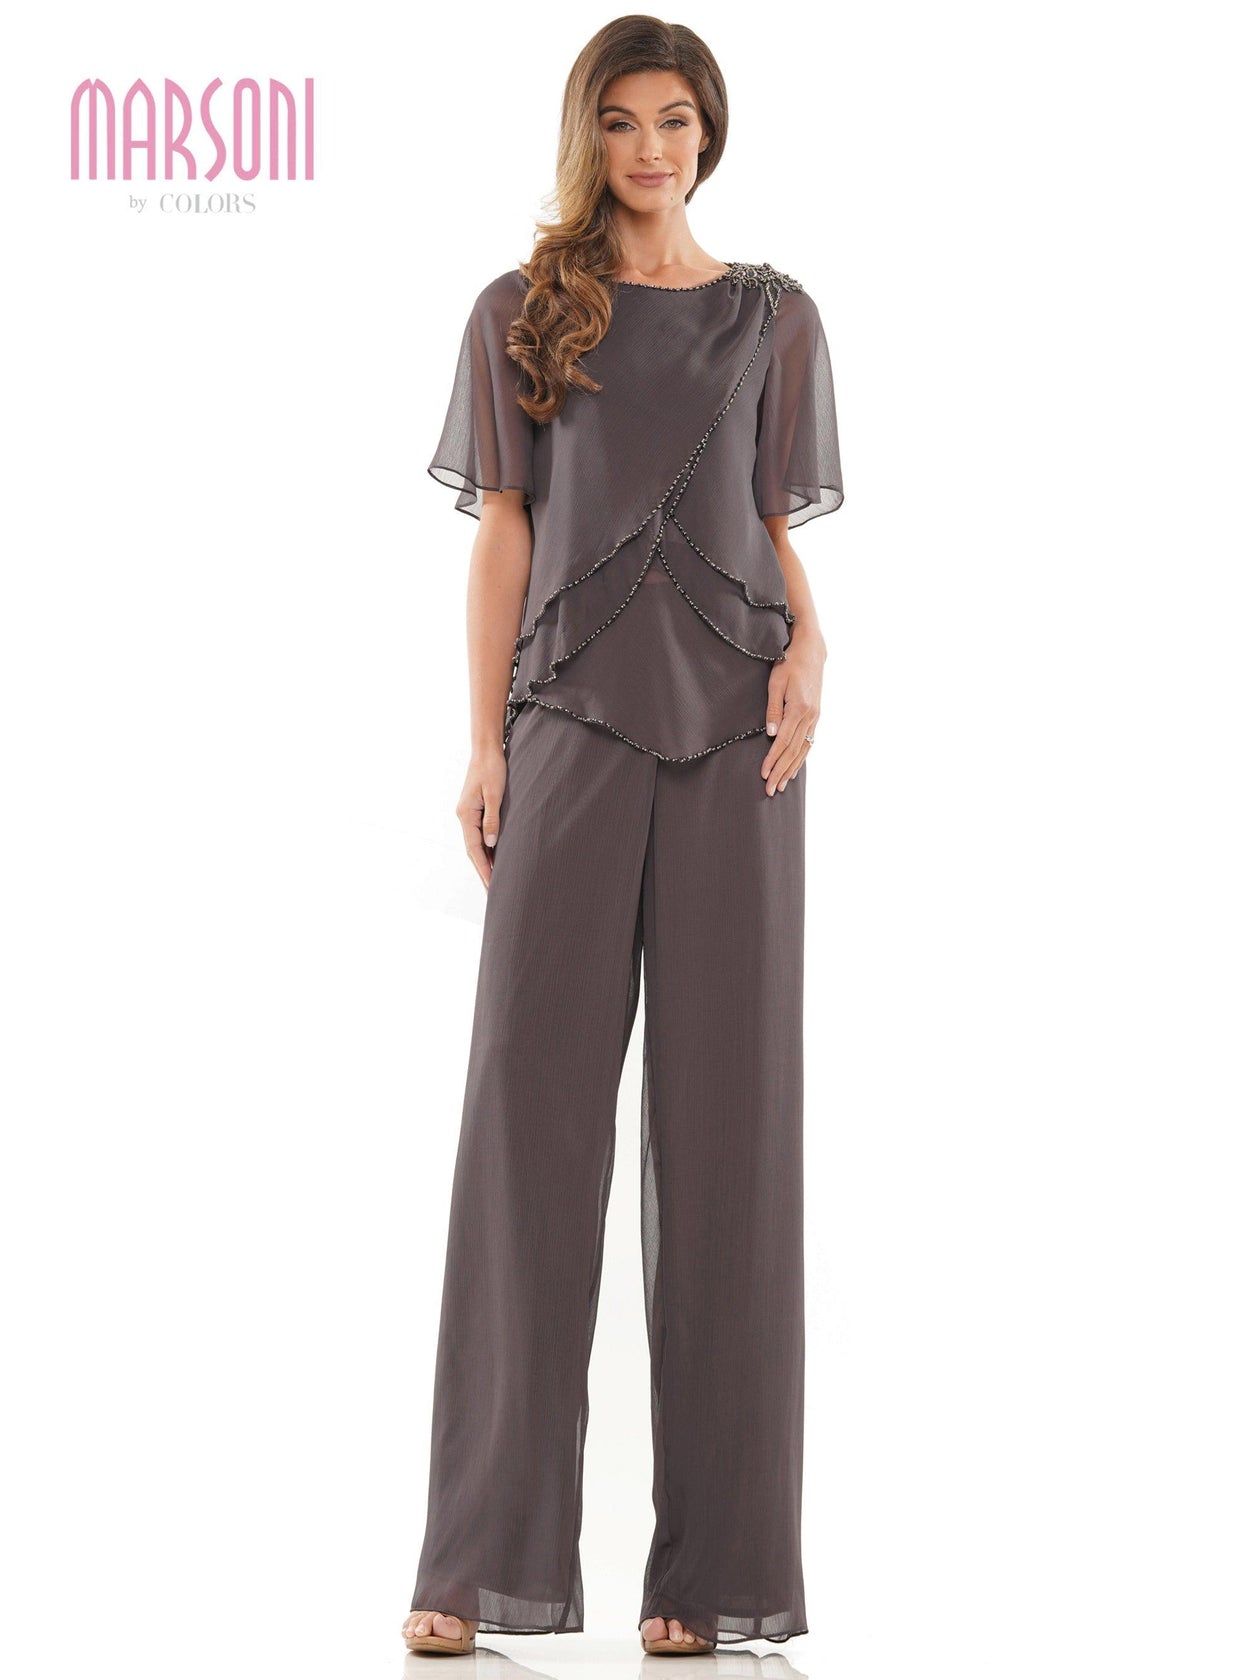 Charcoal Marsoni Formal Mother of the Bride Pant Suit M321 for